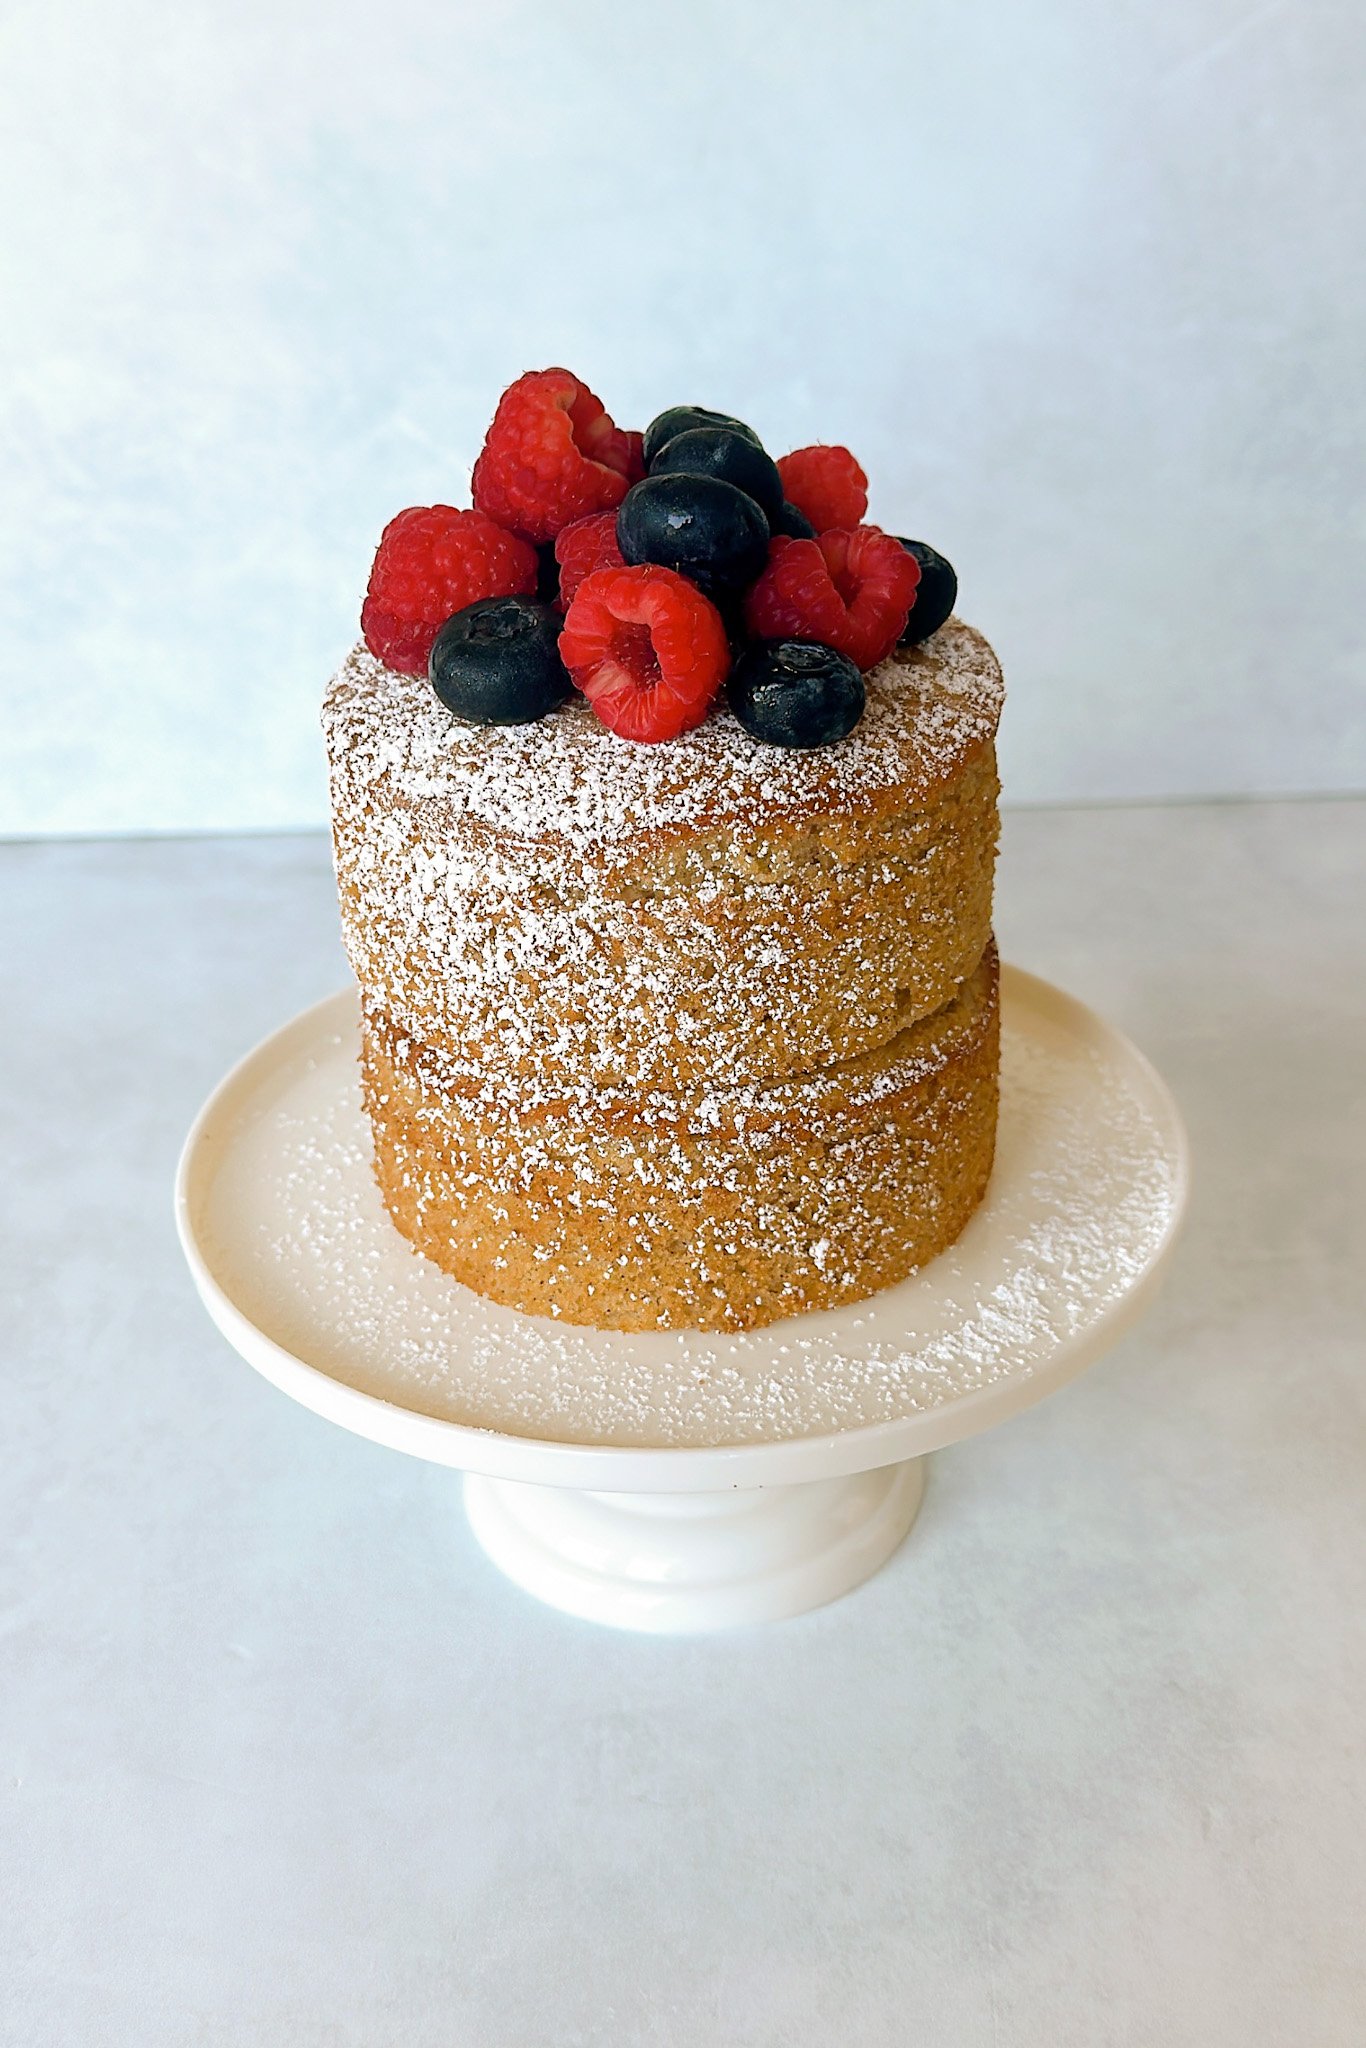 Apple almond cake on a cake stand topped with fresh berries.